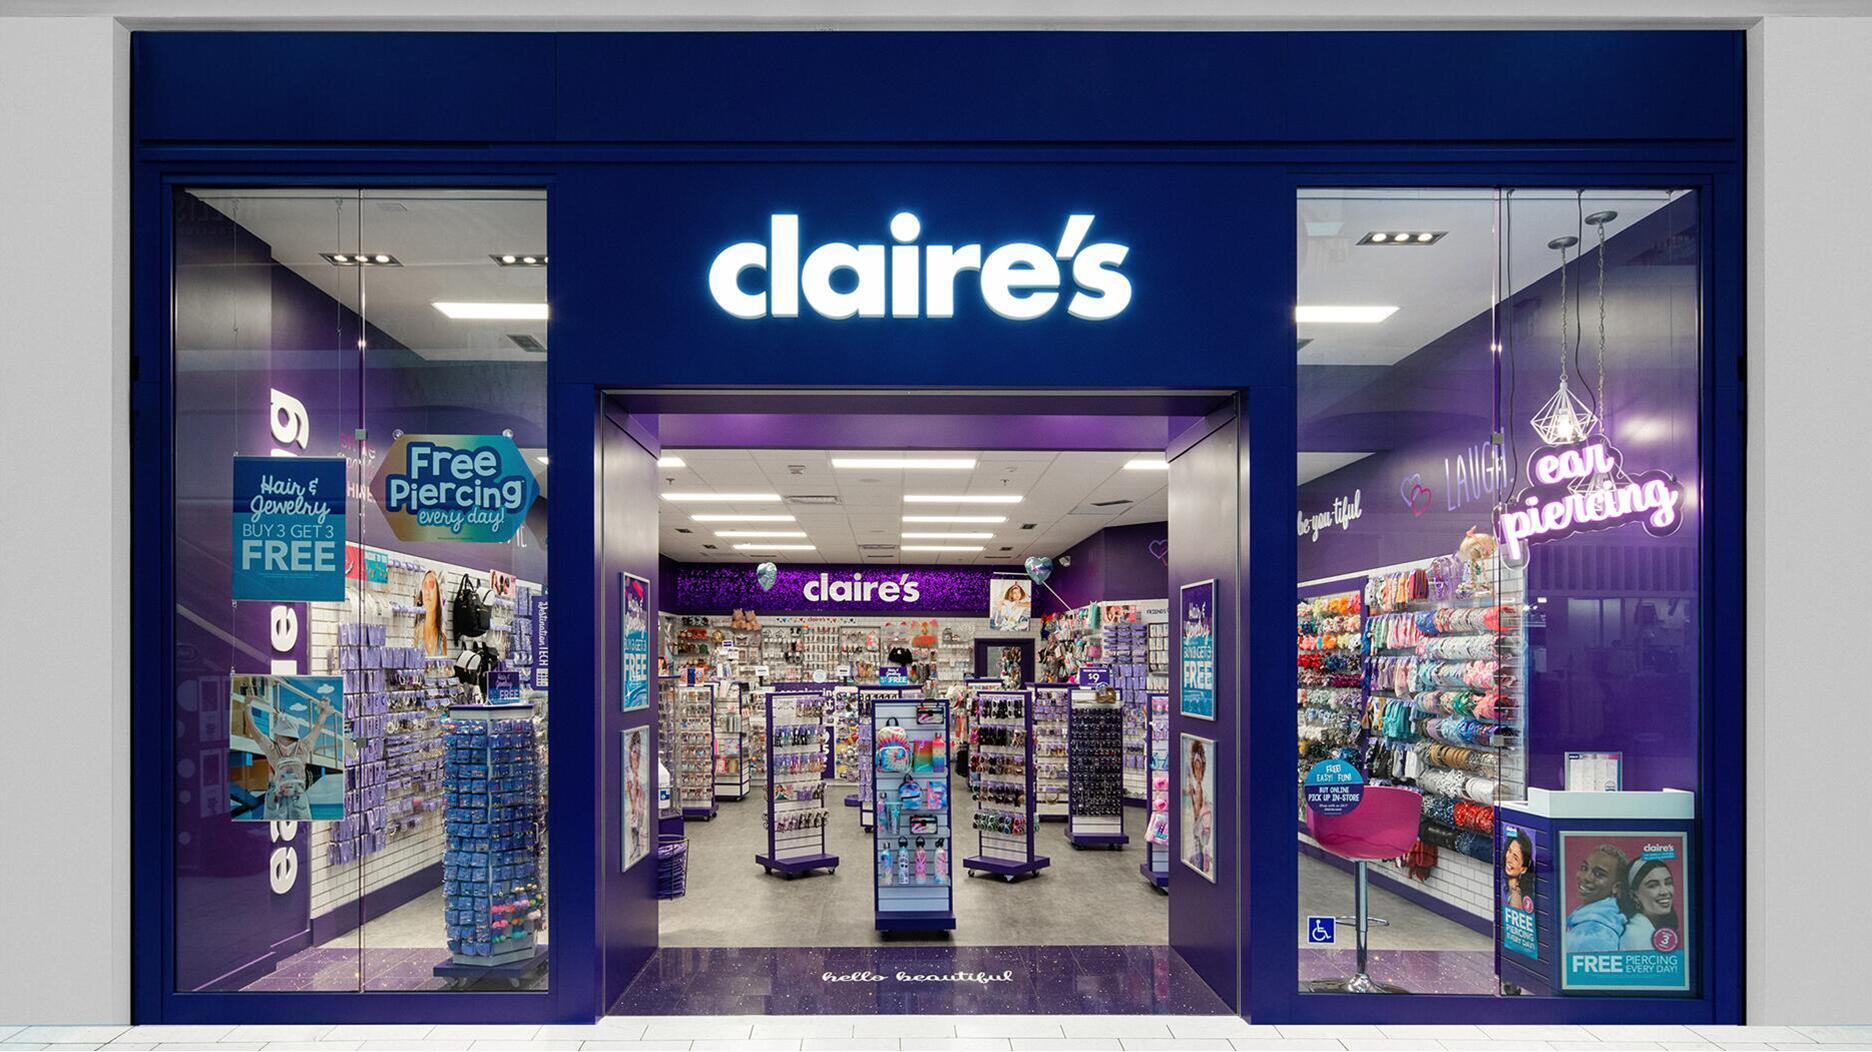 Claire’s storefront